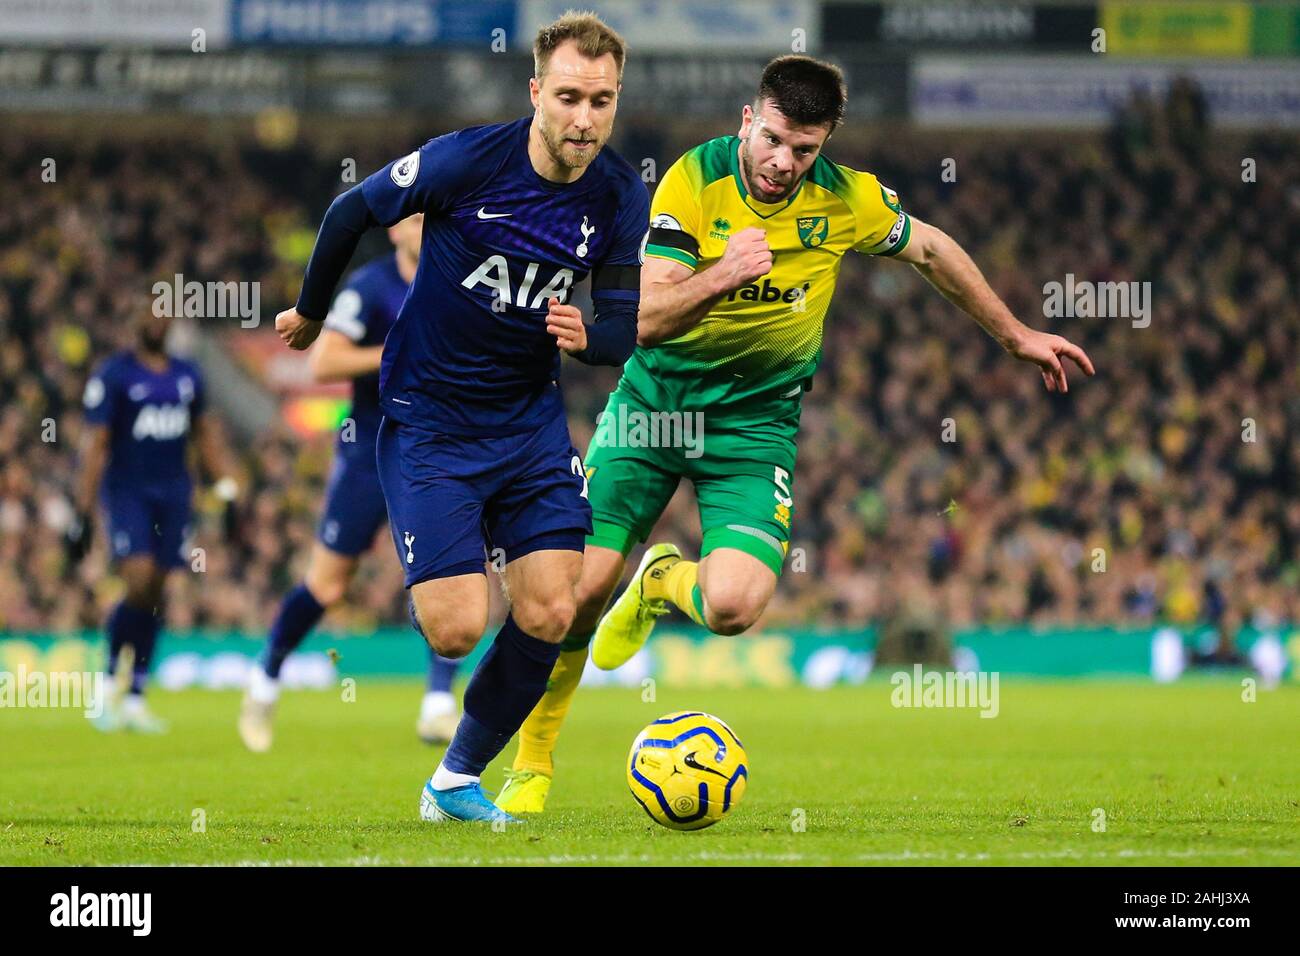 28th December 2019, Carrow Road, Norwich, England; Premier League, Norwich City v Tottenham Hotspur : Christian Eriksen (23) of Tottenham is chased by Grant Hanley (05) of Norwich City Credit: Georgie Kerr/News Images Stock Photo